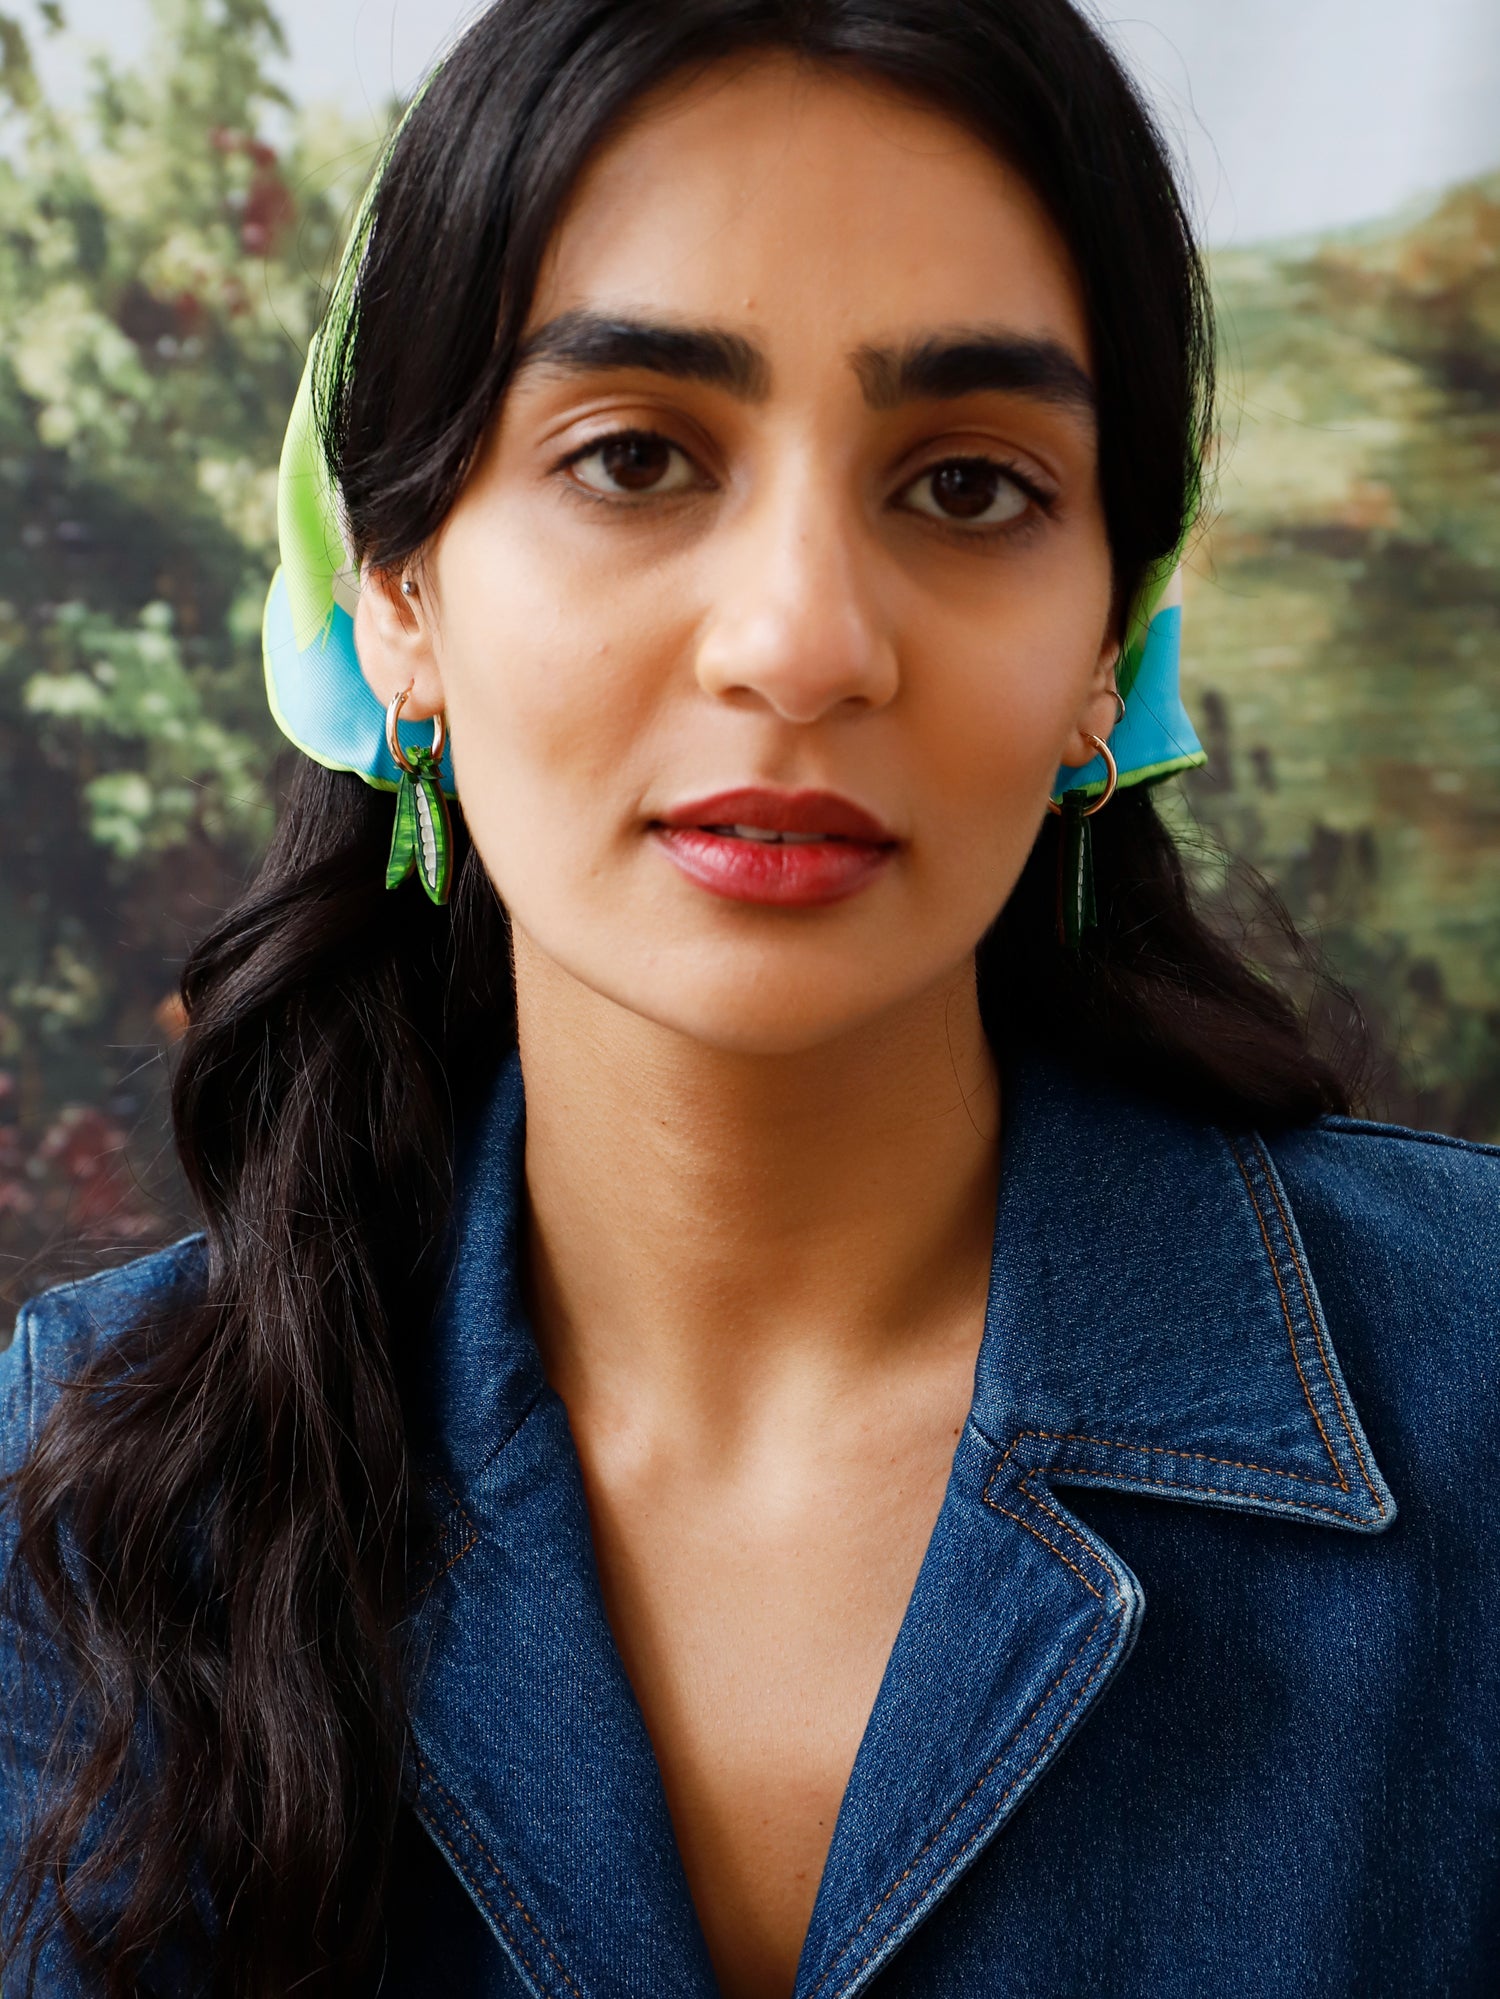 These playful peas in a pod hoop earrings are made from marbled acrylic, wood with sterling silver posts. Handmade in London by Wolf & Moon.